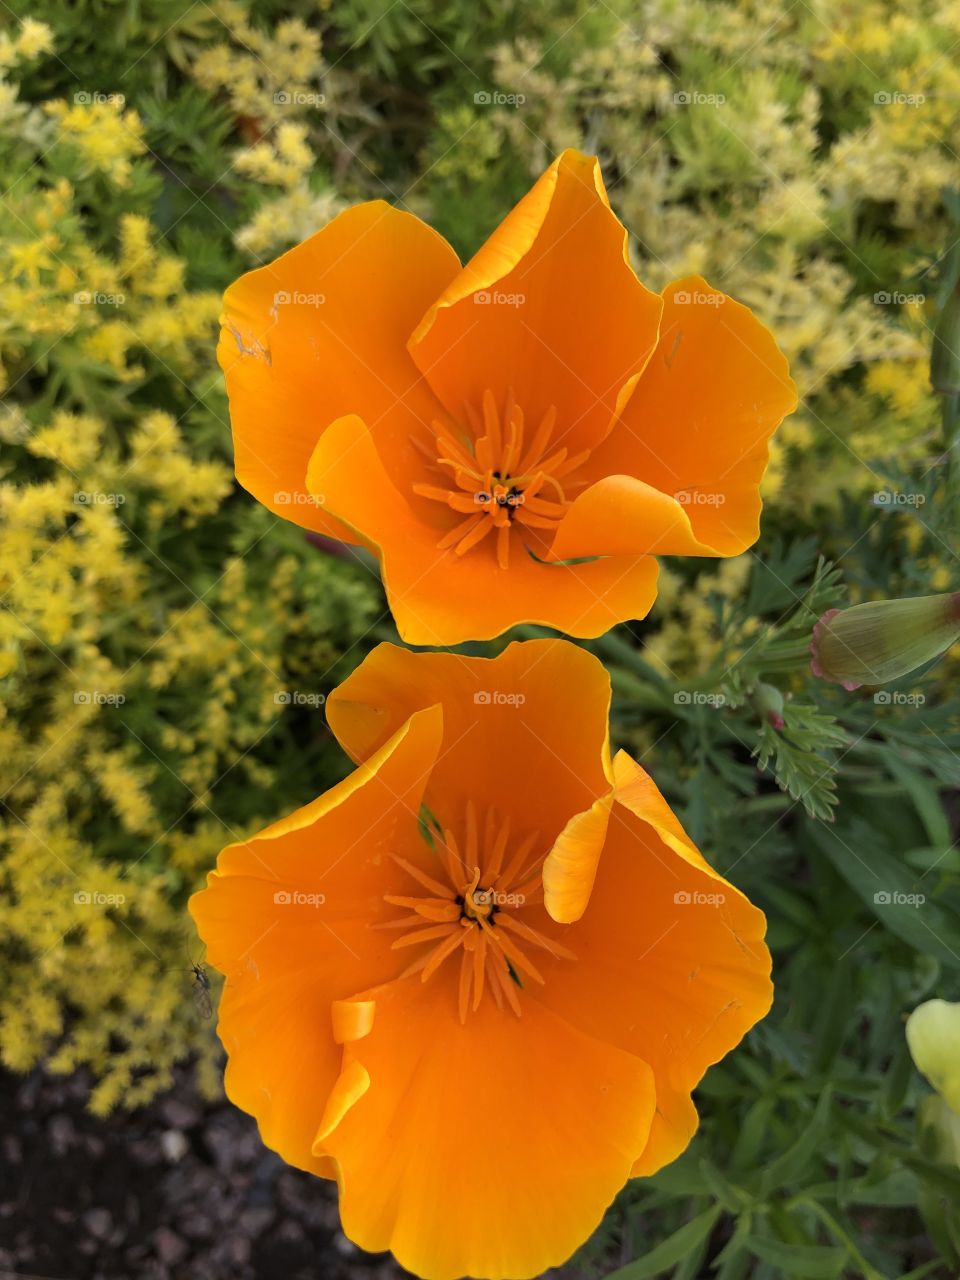 These lovely tango colored flowers are an absolute delight.